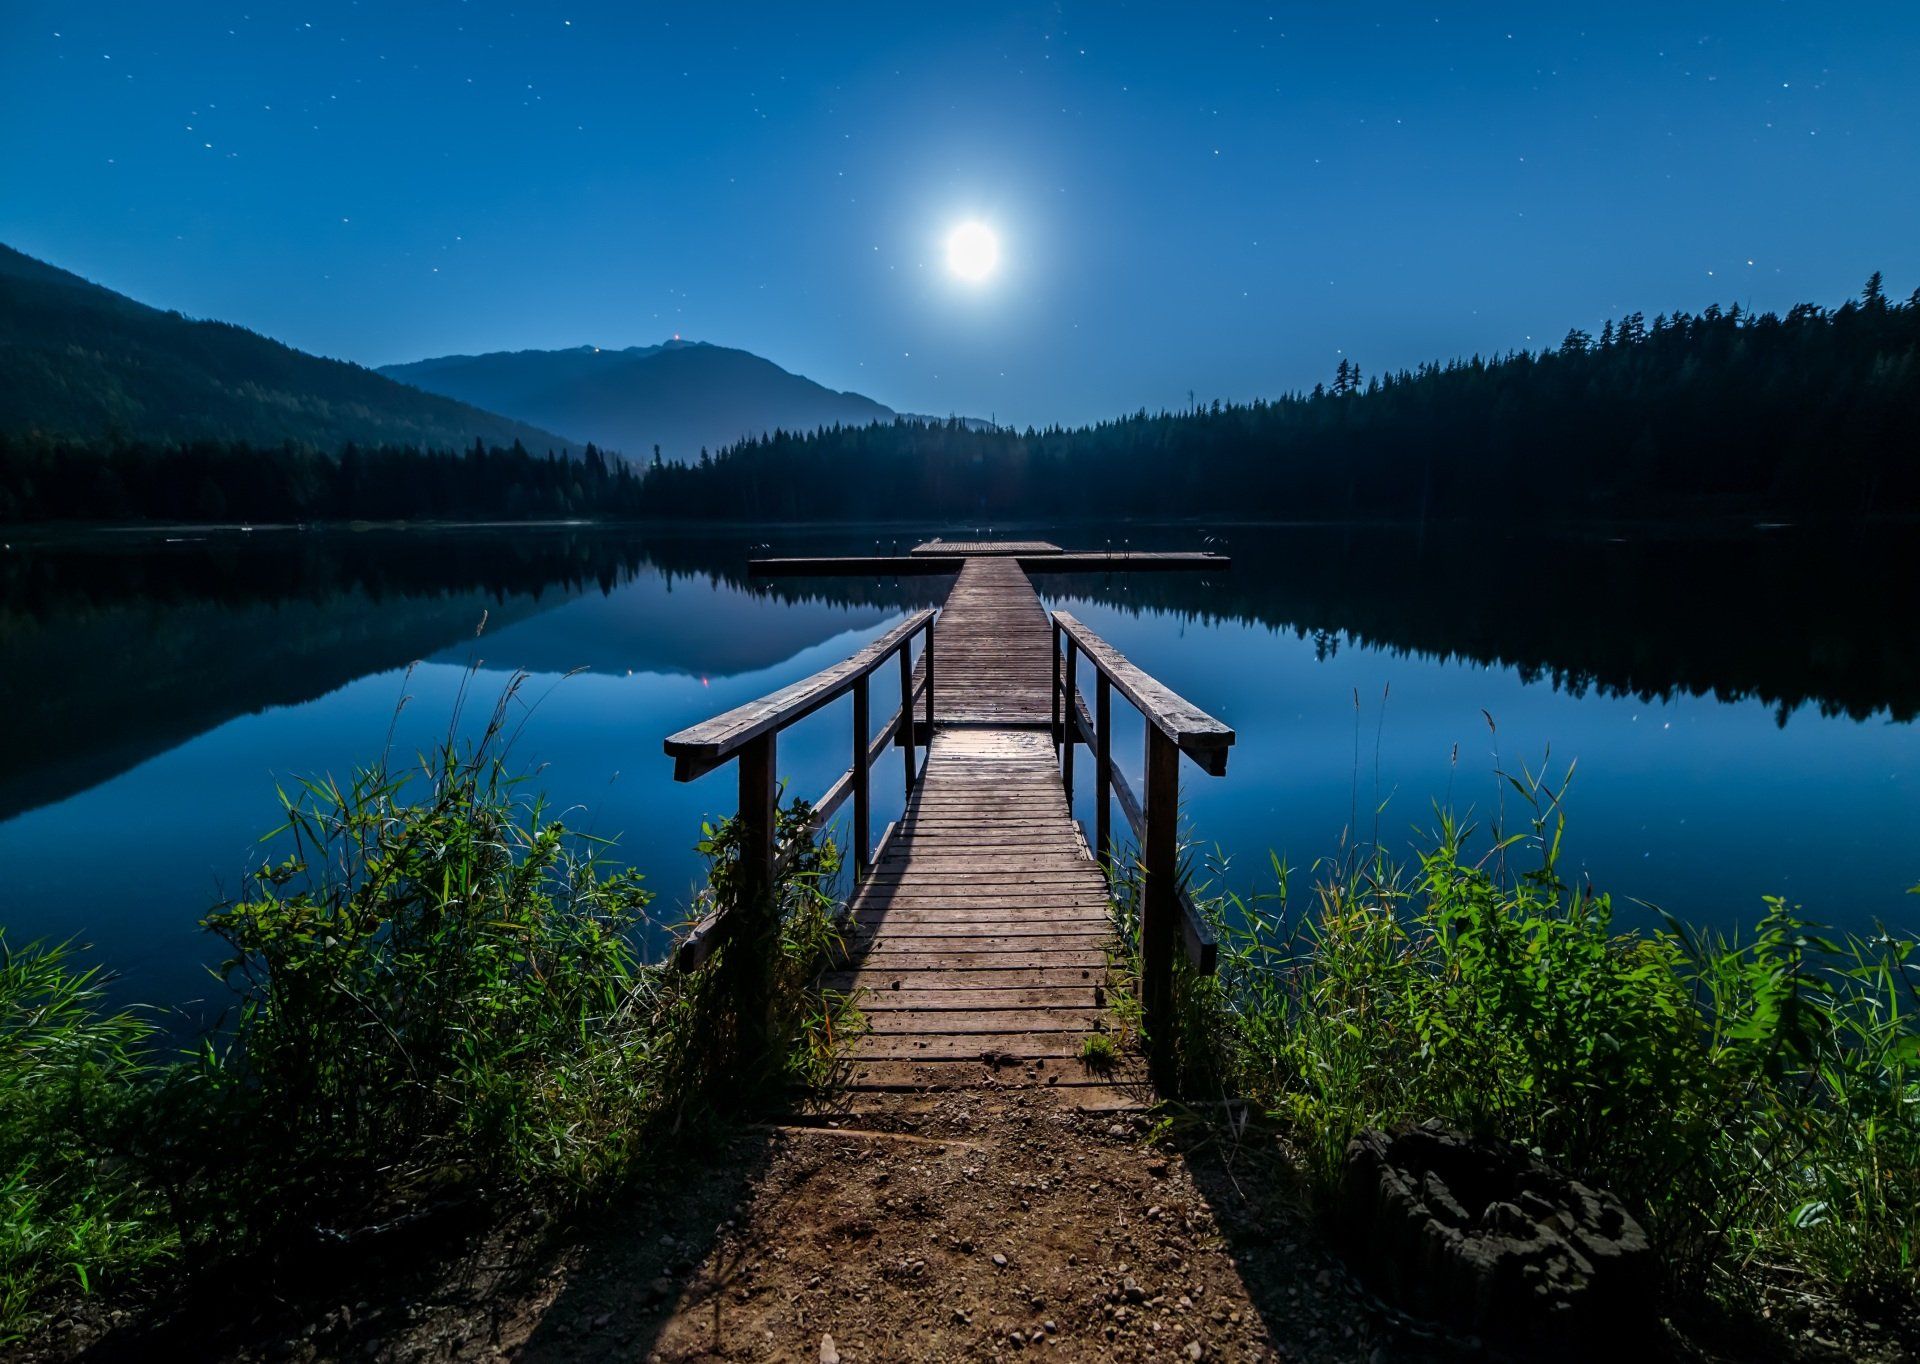 Beautifully calm moon-lit water at the end of a wooden pier, depicting a calm state of mind.